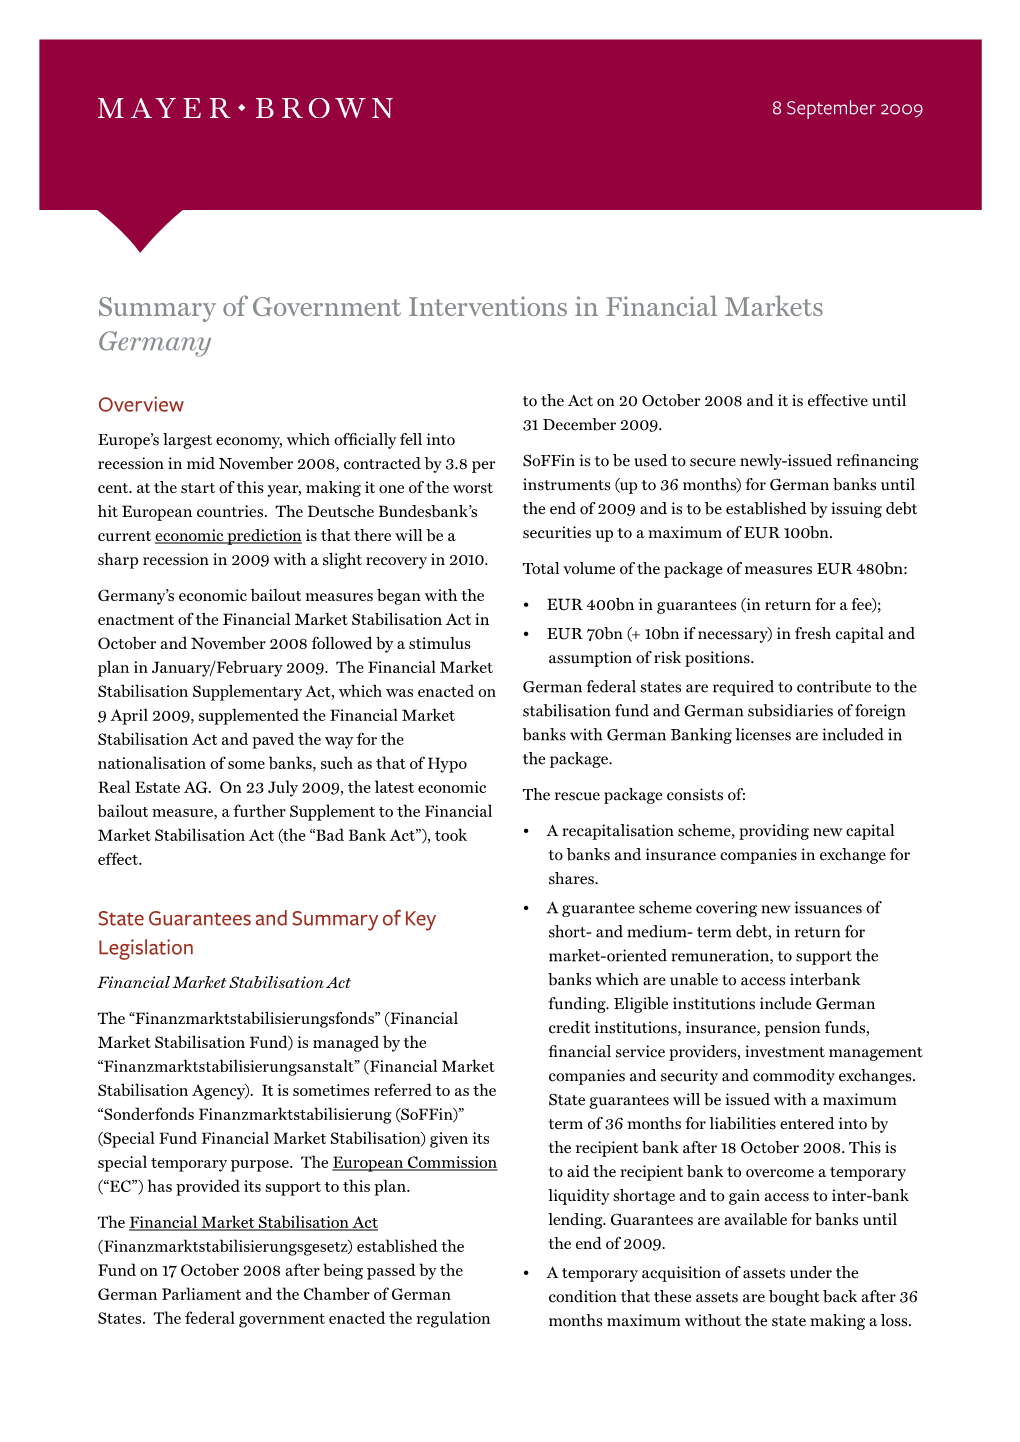 Summary of Government Interventions in Financial Markets Germany